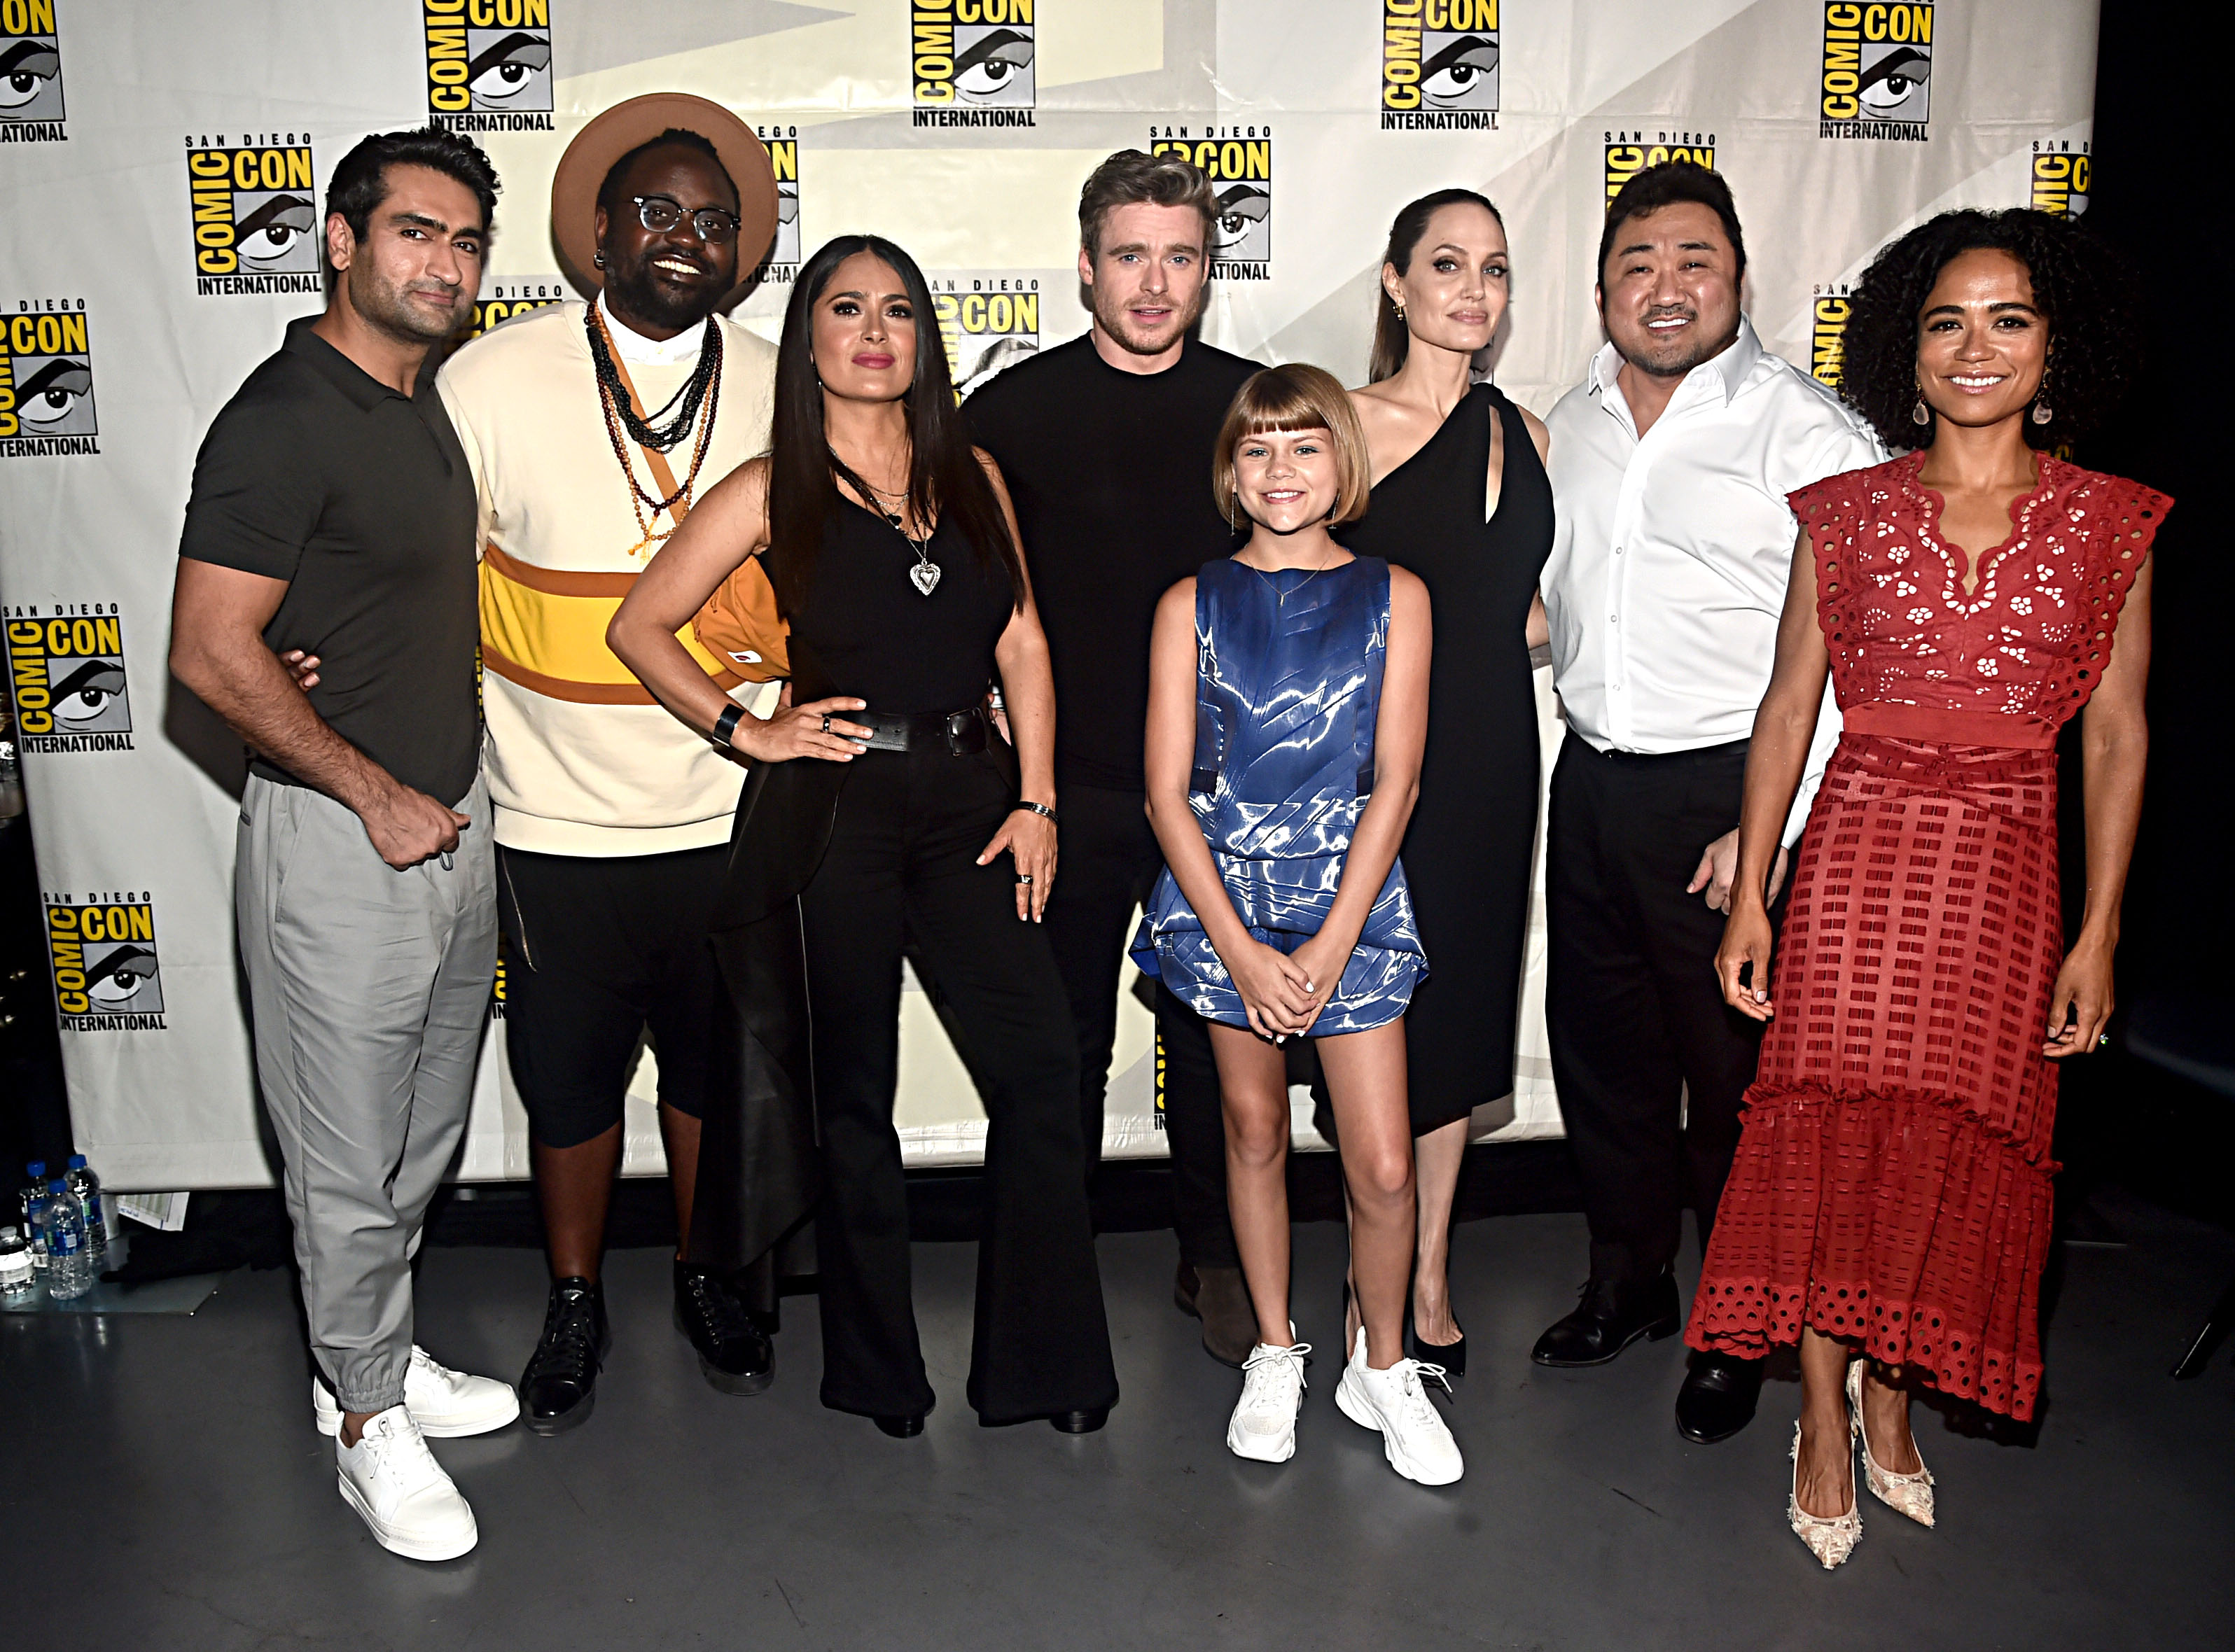 (L-R) Kumail Nanjiani, Brian Tyree Henry, Salma Hayek, Richard Madden, Lia McHugh, Angelina Jolie, Don Lee and Lauren Ridloff of Marvel Studios' 'The Eternals' at the San Diego Comic-Con in 2019. (Getty Images for Disney)